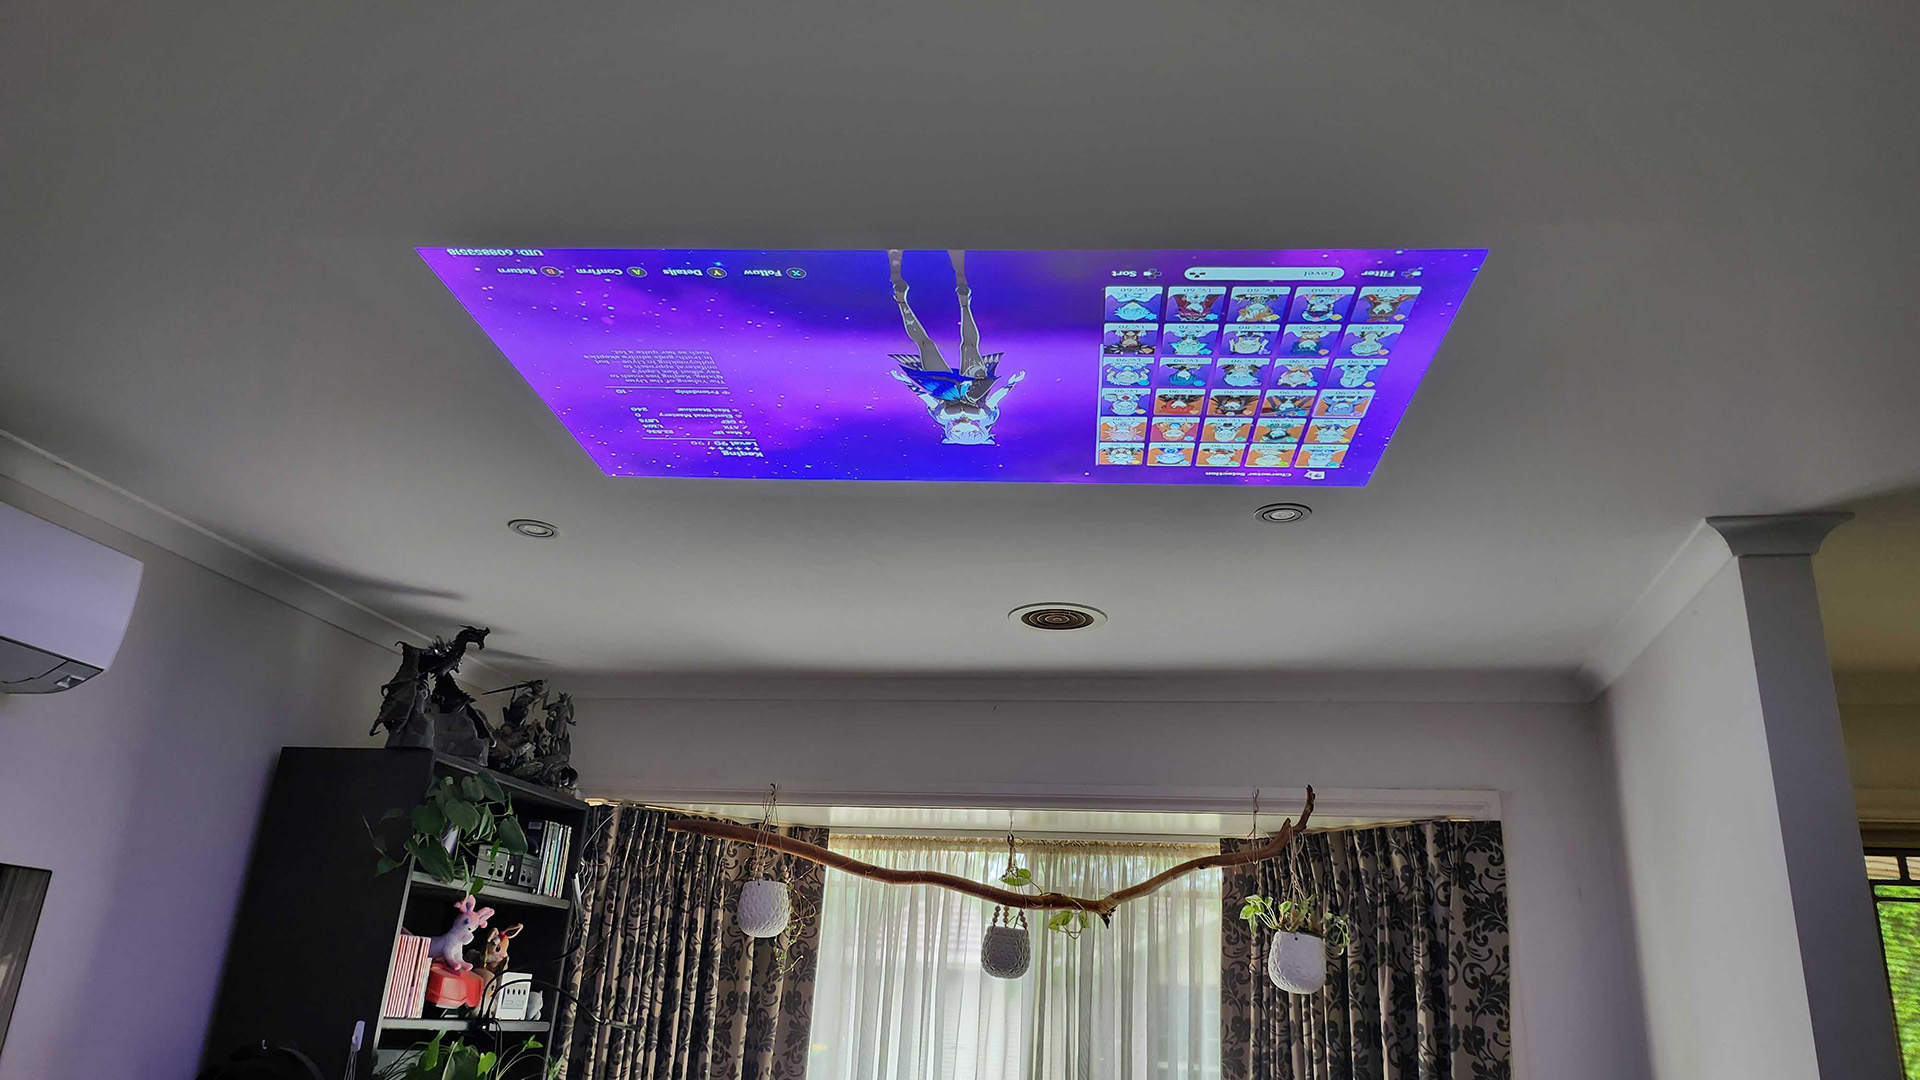 Xgimi Horizon Pro projector setup in house.